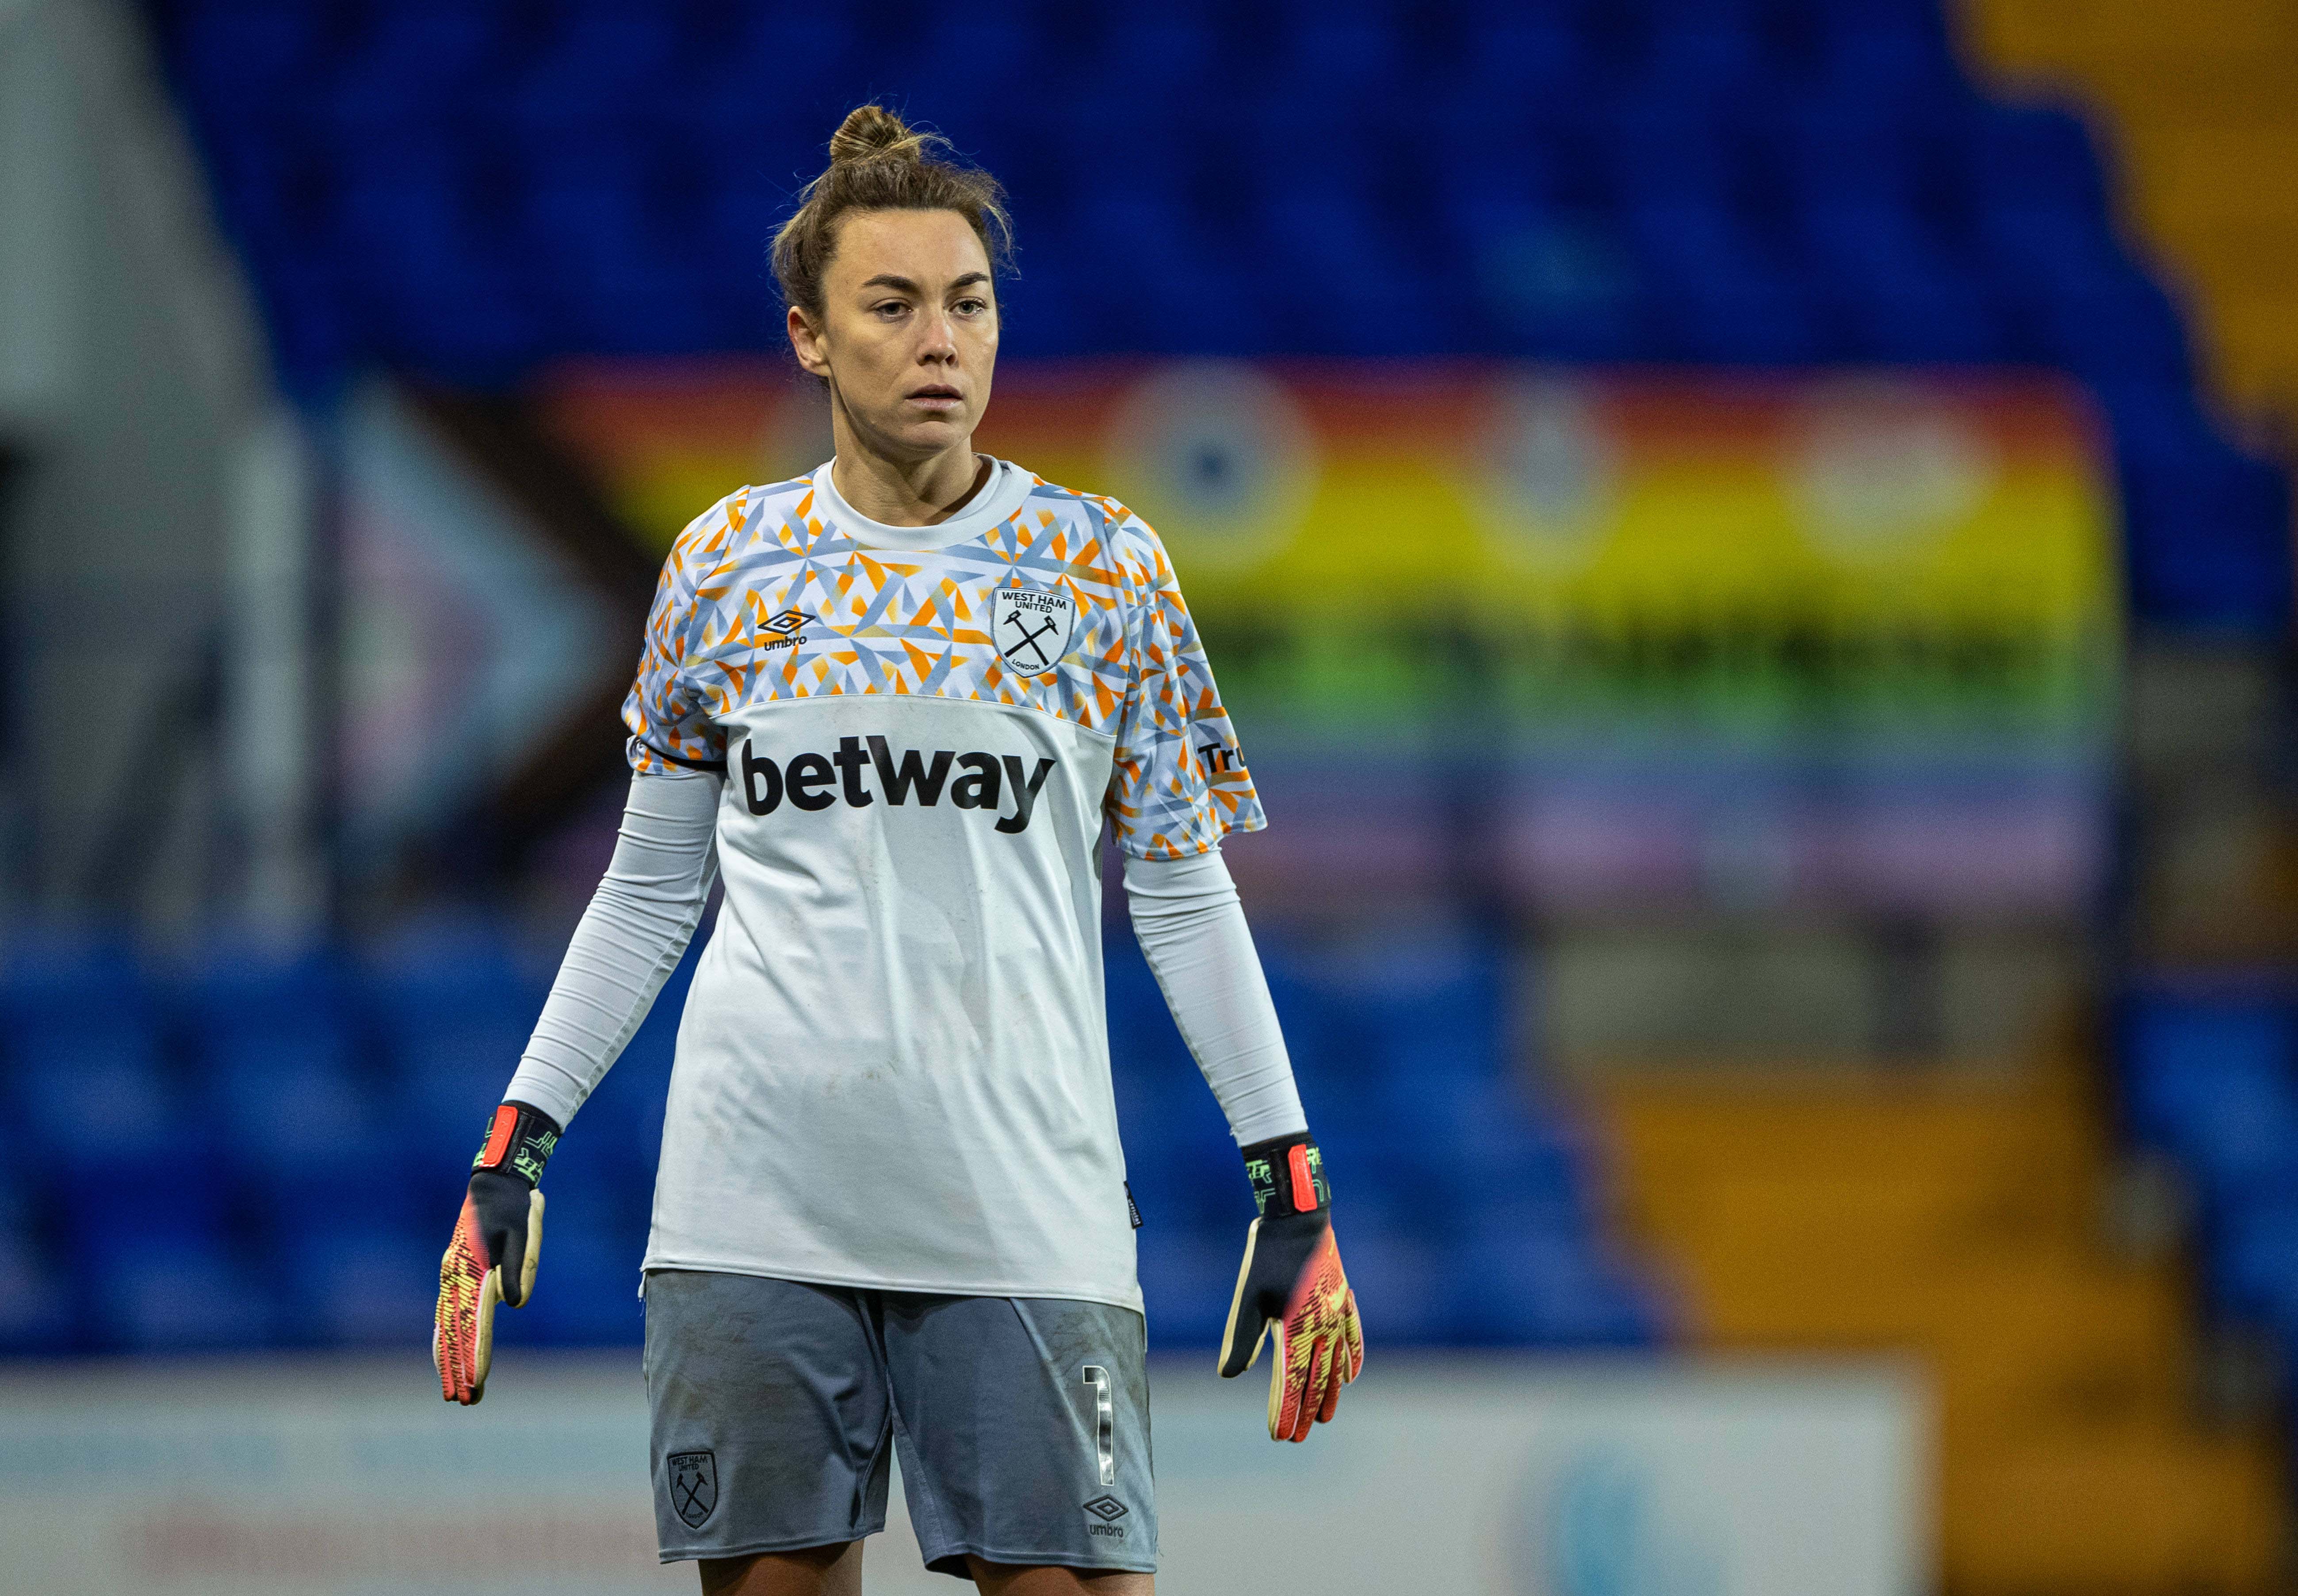 West Ham United s goalkeeper Mackenzie Arnold during the FA Women s League Cup Quarter-Final match between Liverpool FC Women and West Ham United FC Women at Prenton Park.